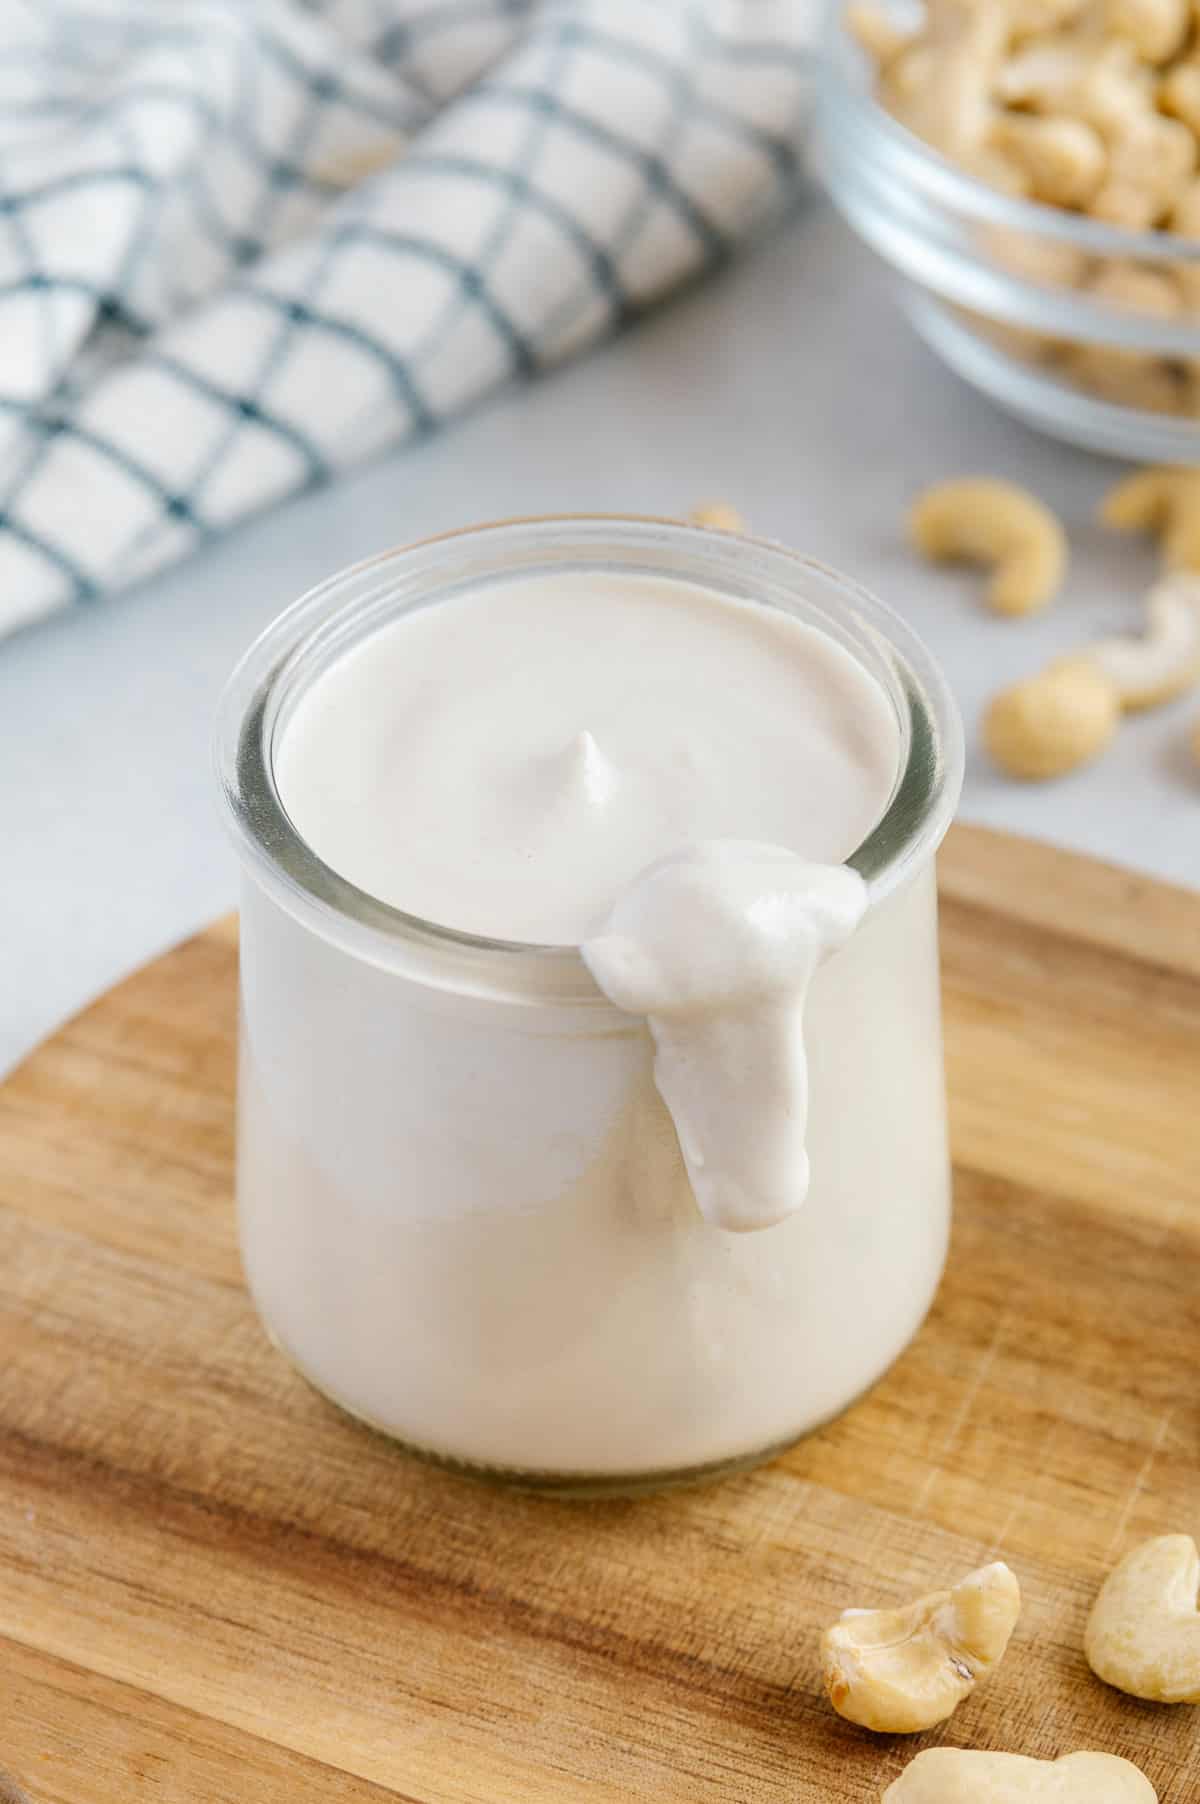 A glass jar filled with cashew cream spilling over the top.